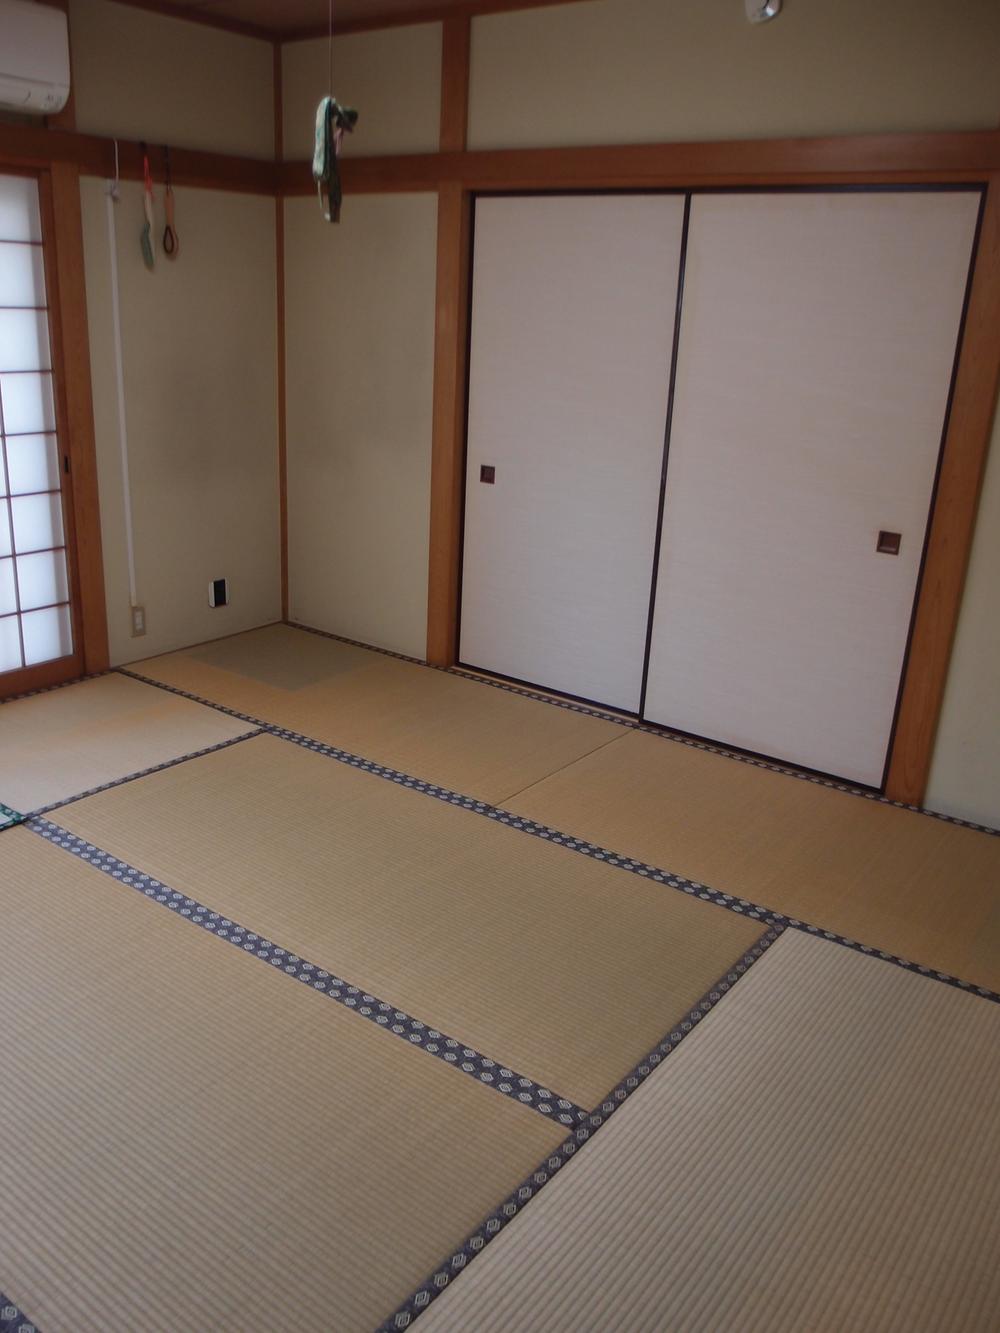 Non-living room. First floor Japanese-style room (about 8 tatami mats) (September 2013) Shooting